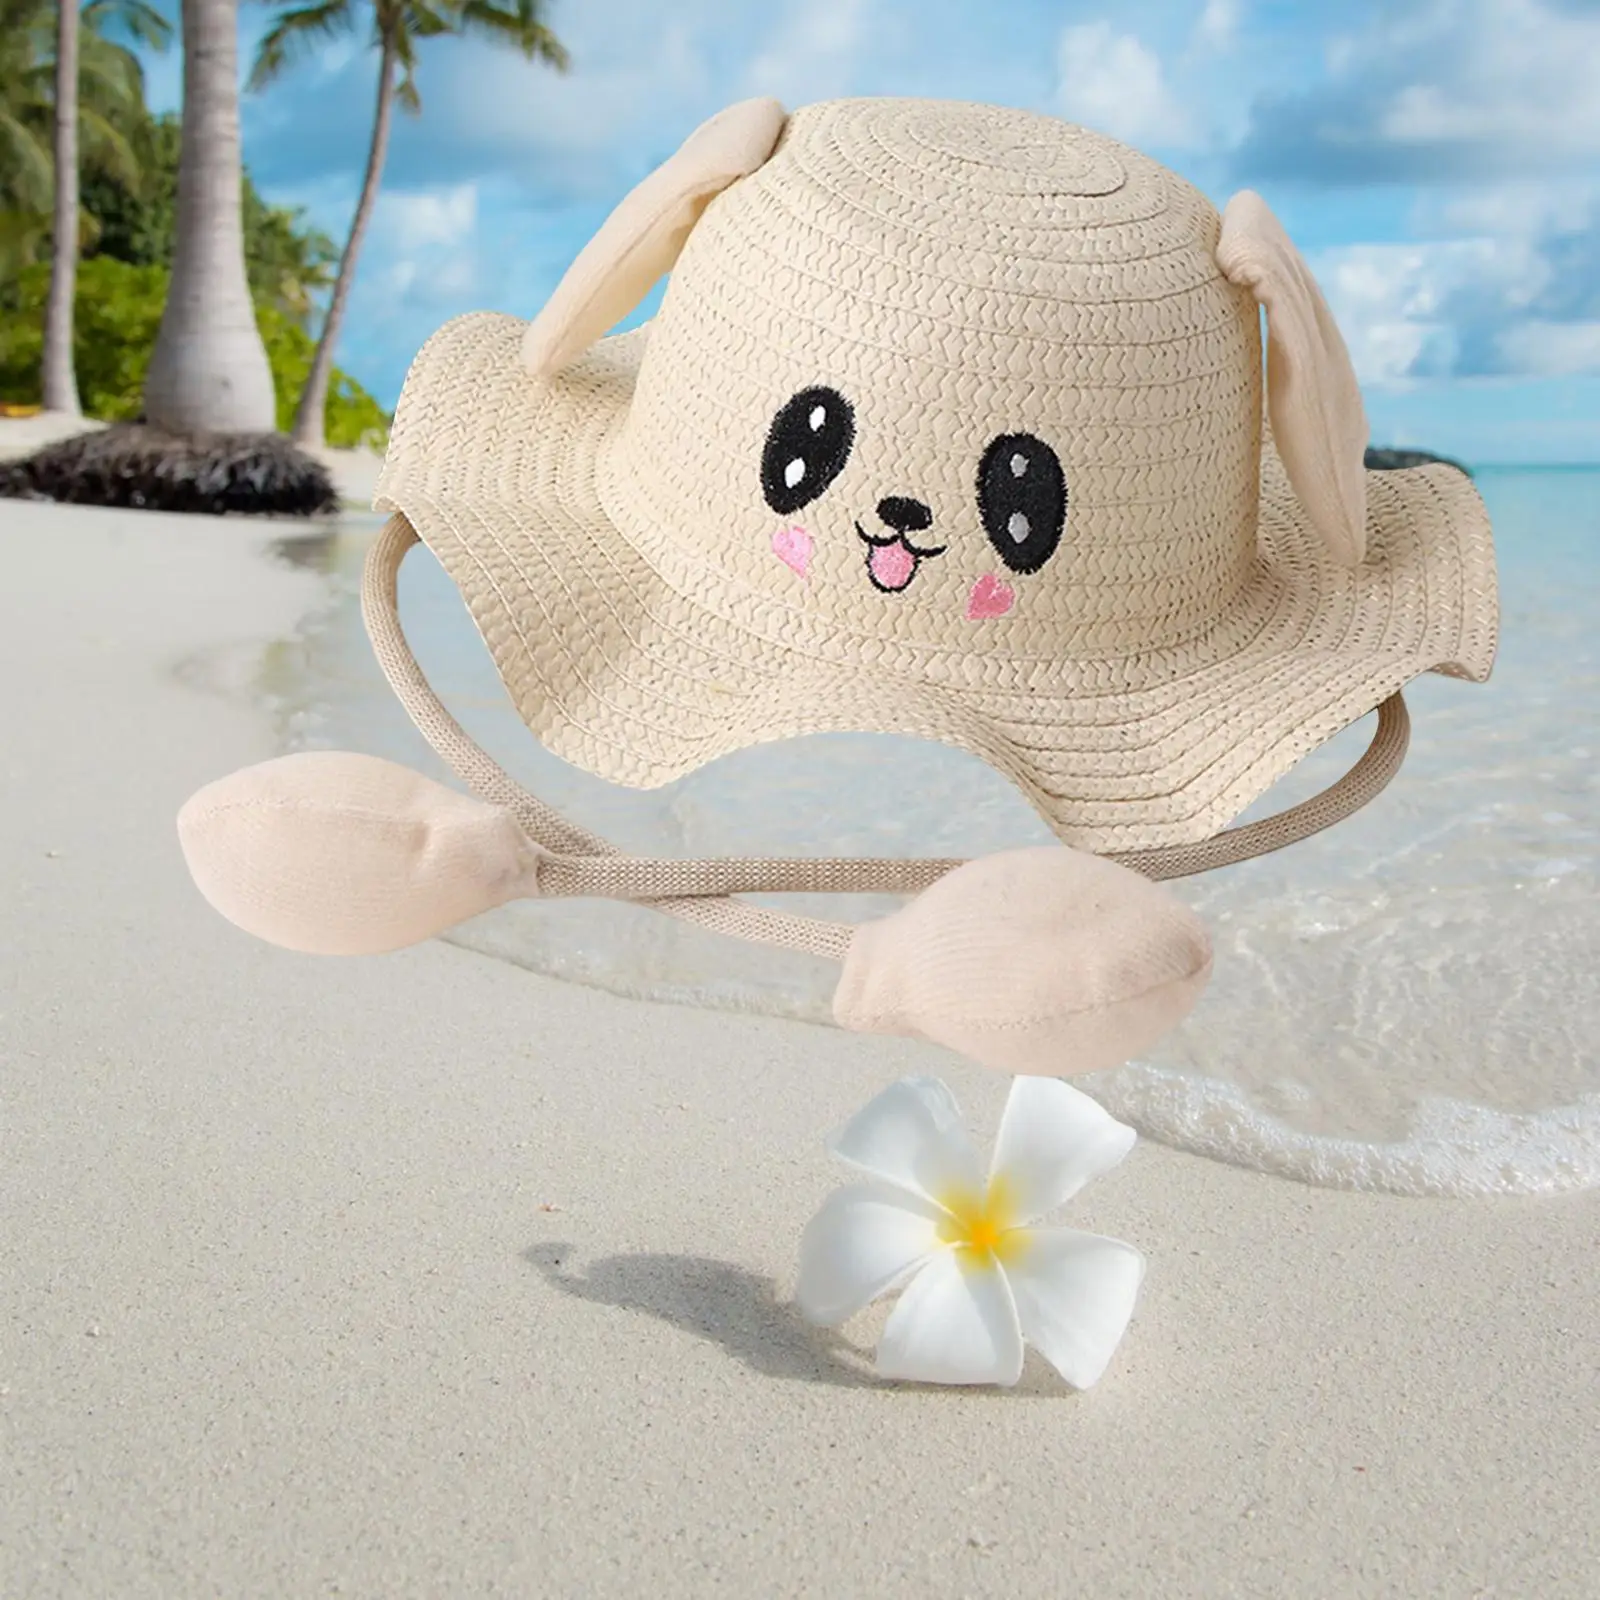 Rabbit Ear Straw Hat Sun Hat with Ears Moving Jumping Beach Hat Fisherman Cap for Beach Dress Costume Accessories Gift